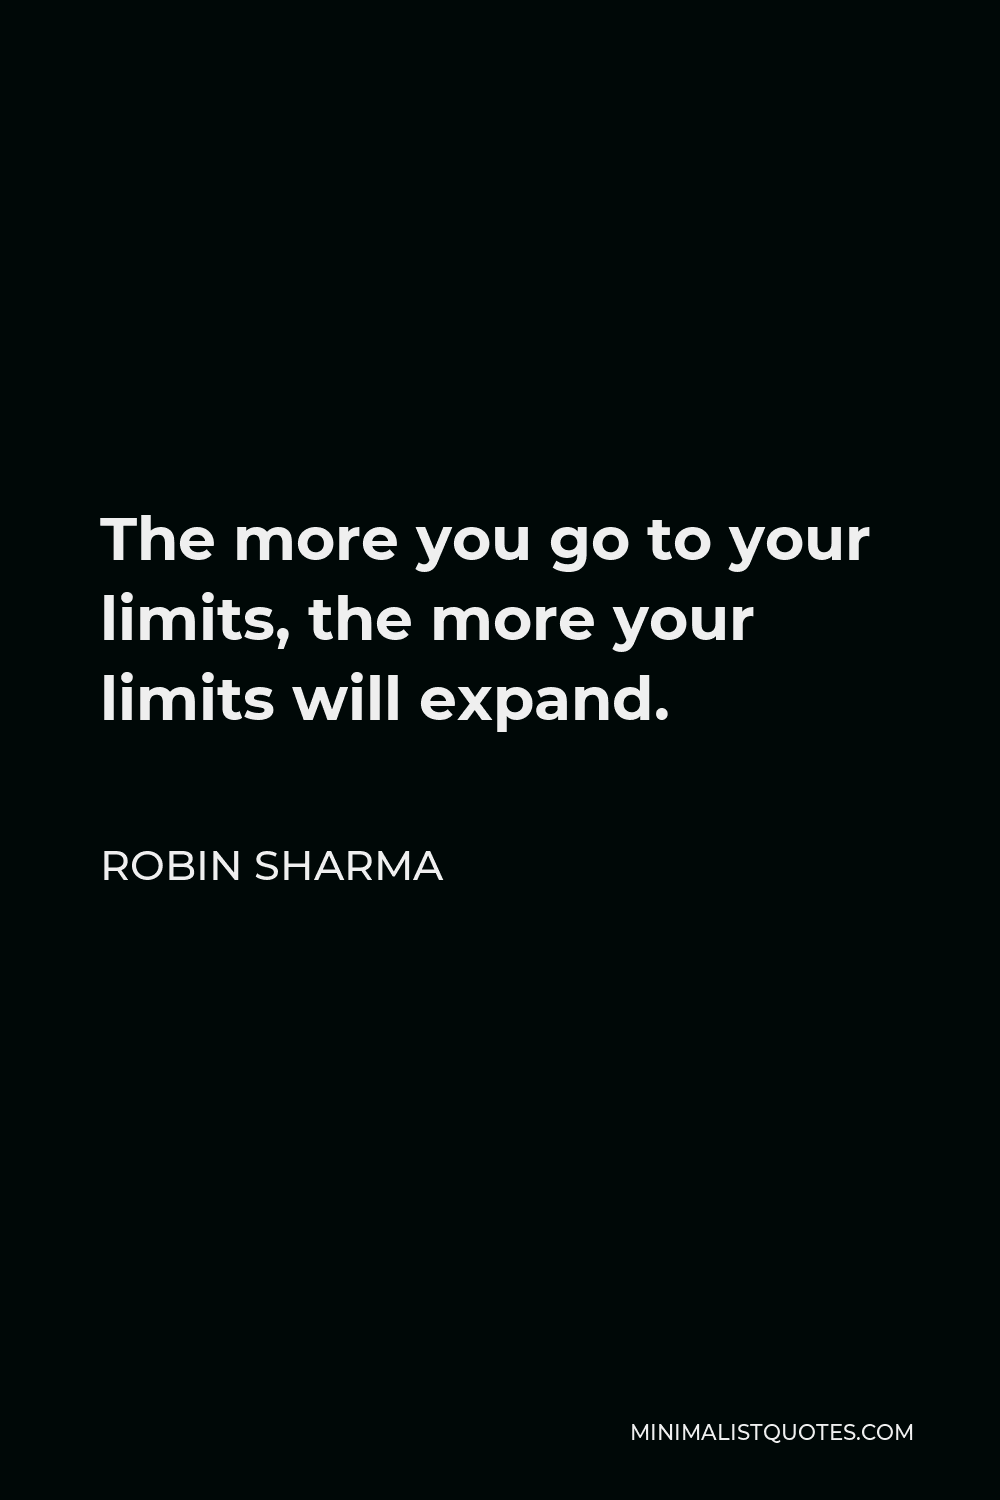 Robin Sharma Quote - The more you go to your limits, the more your limits will expand.